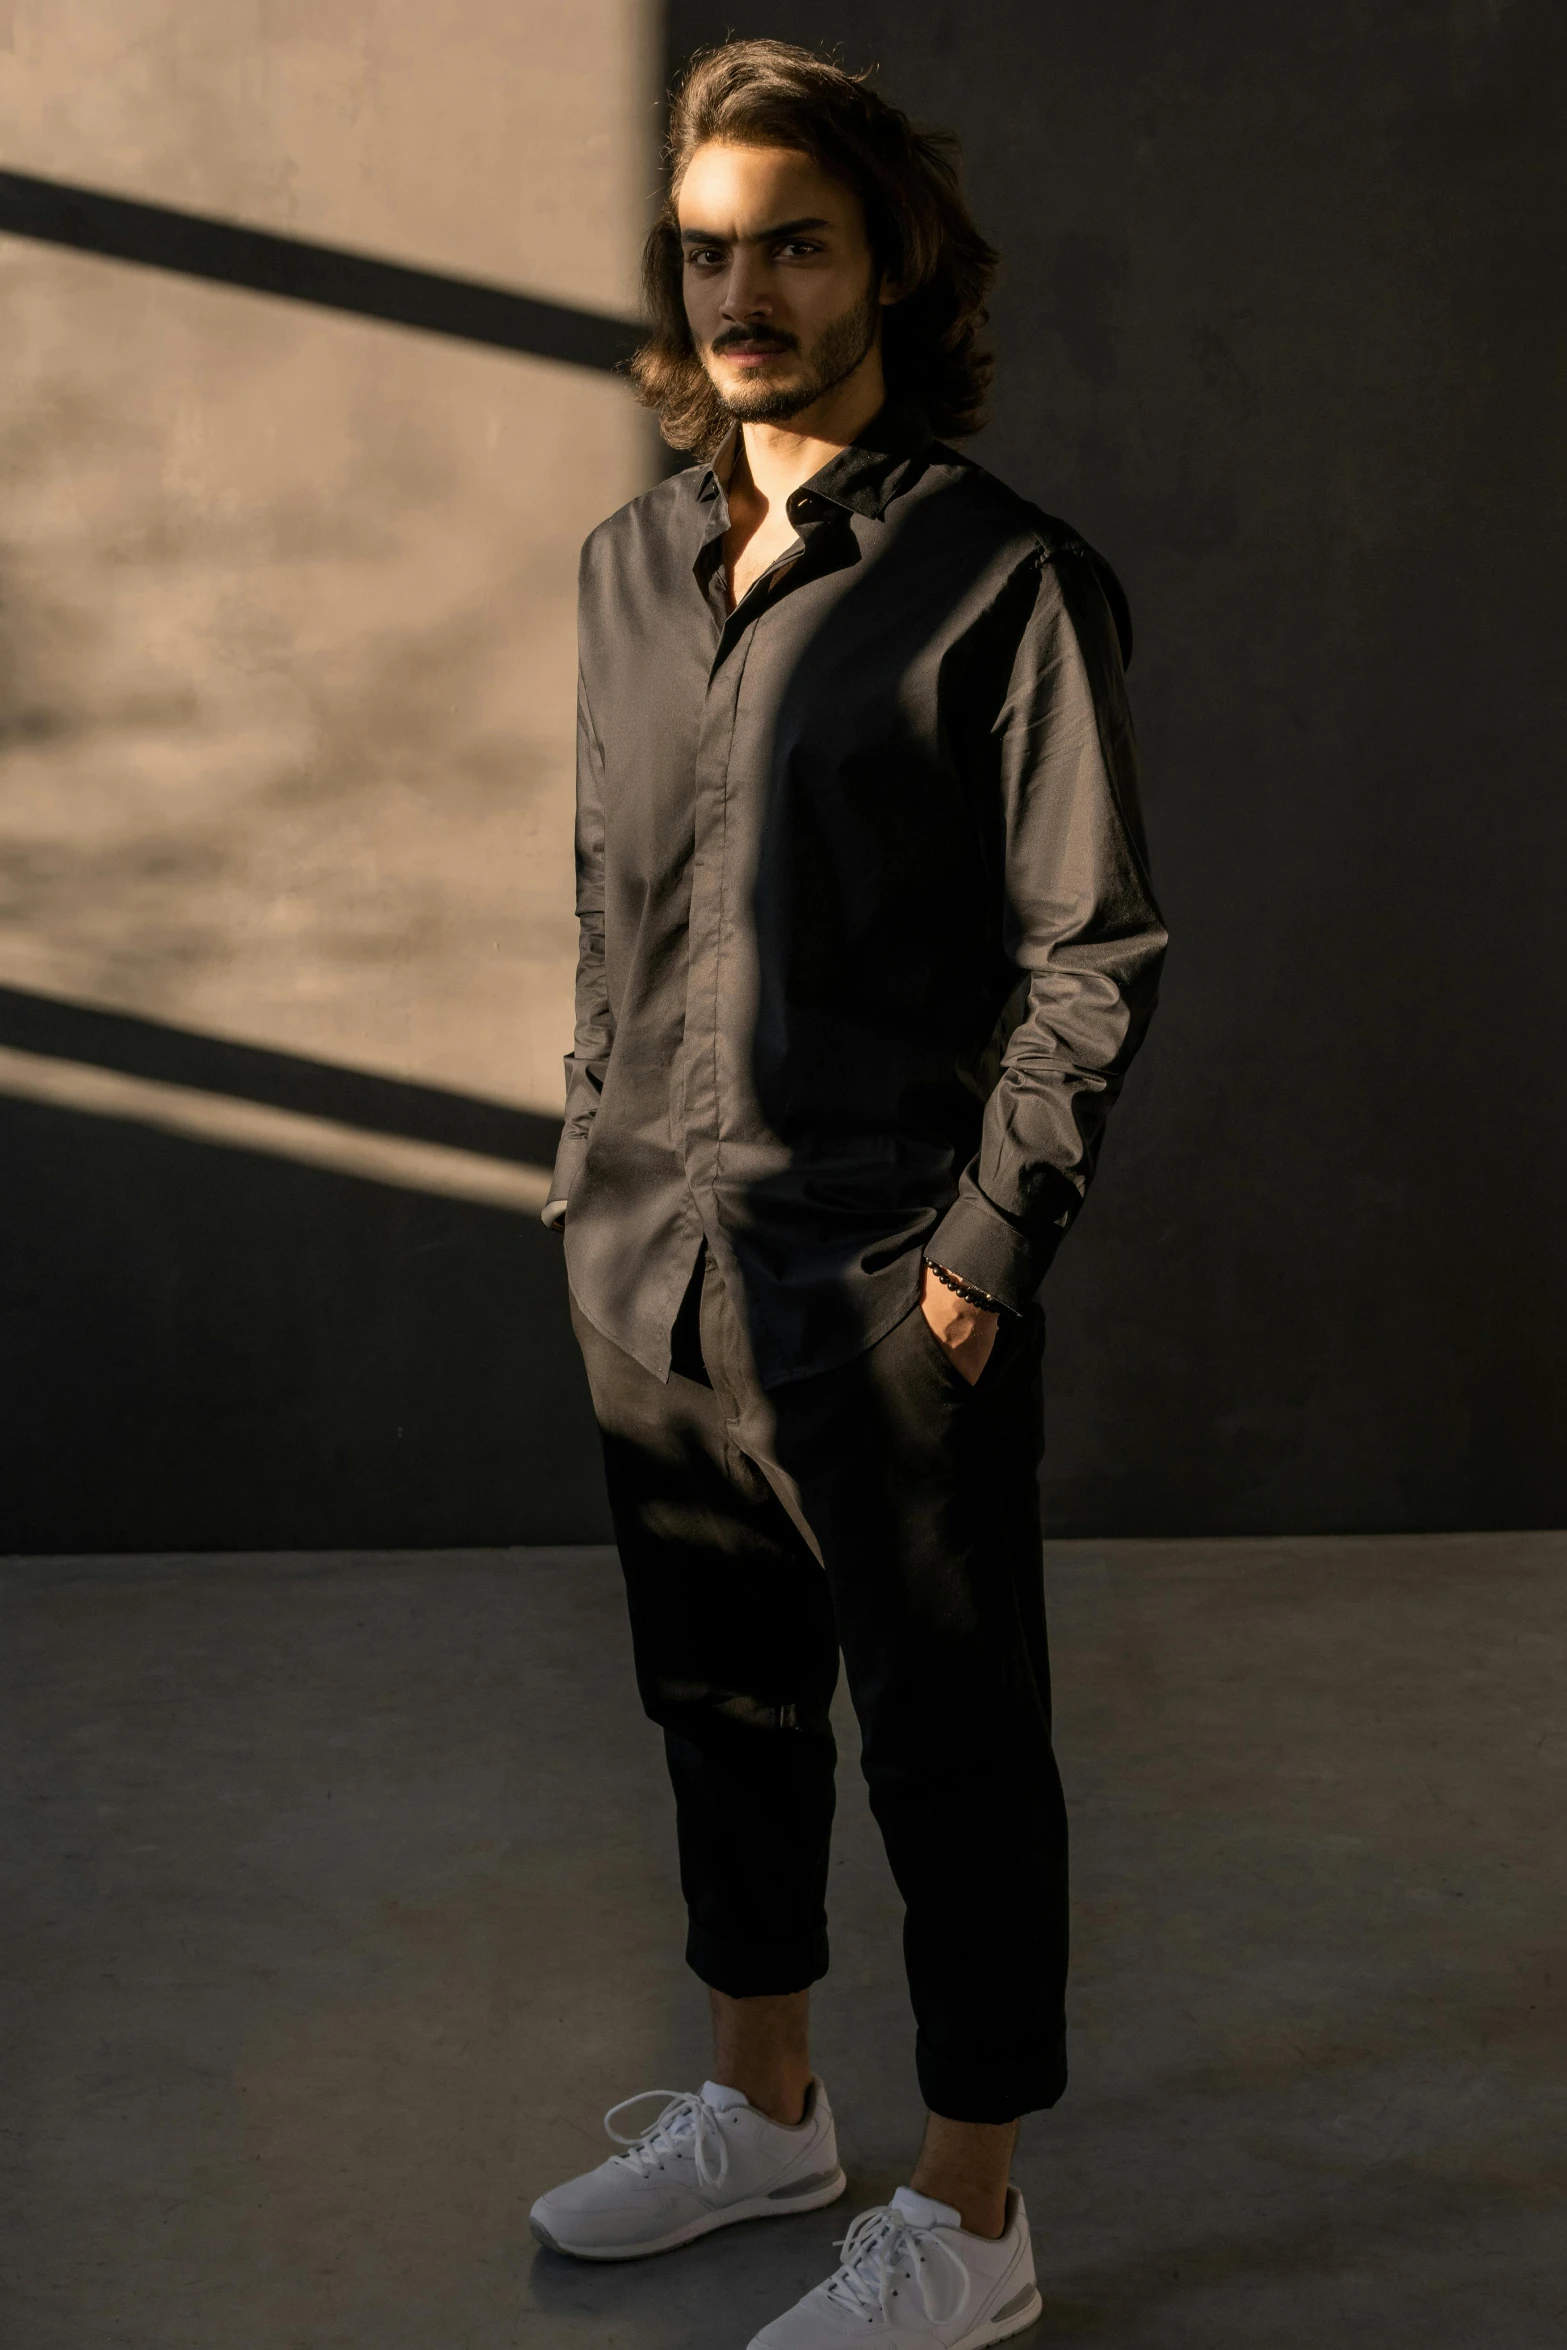 a man with long hair standing in front of a wall, jumpsuit, wearing a black shirt, style of maciej kuciara, f / 2 0